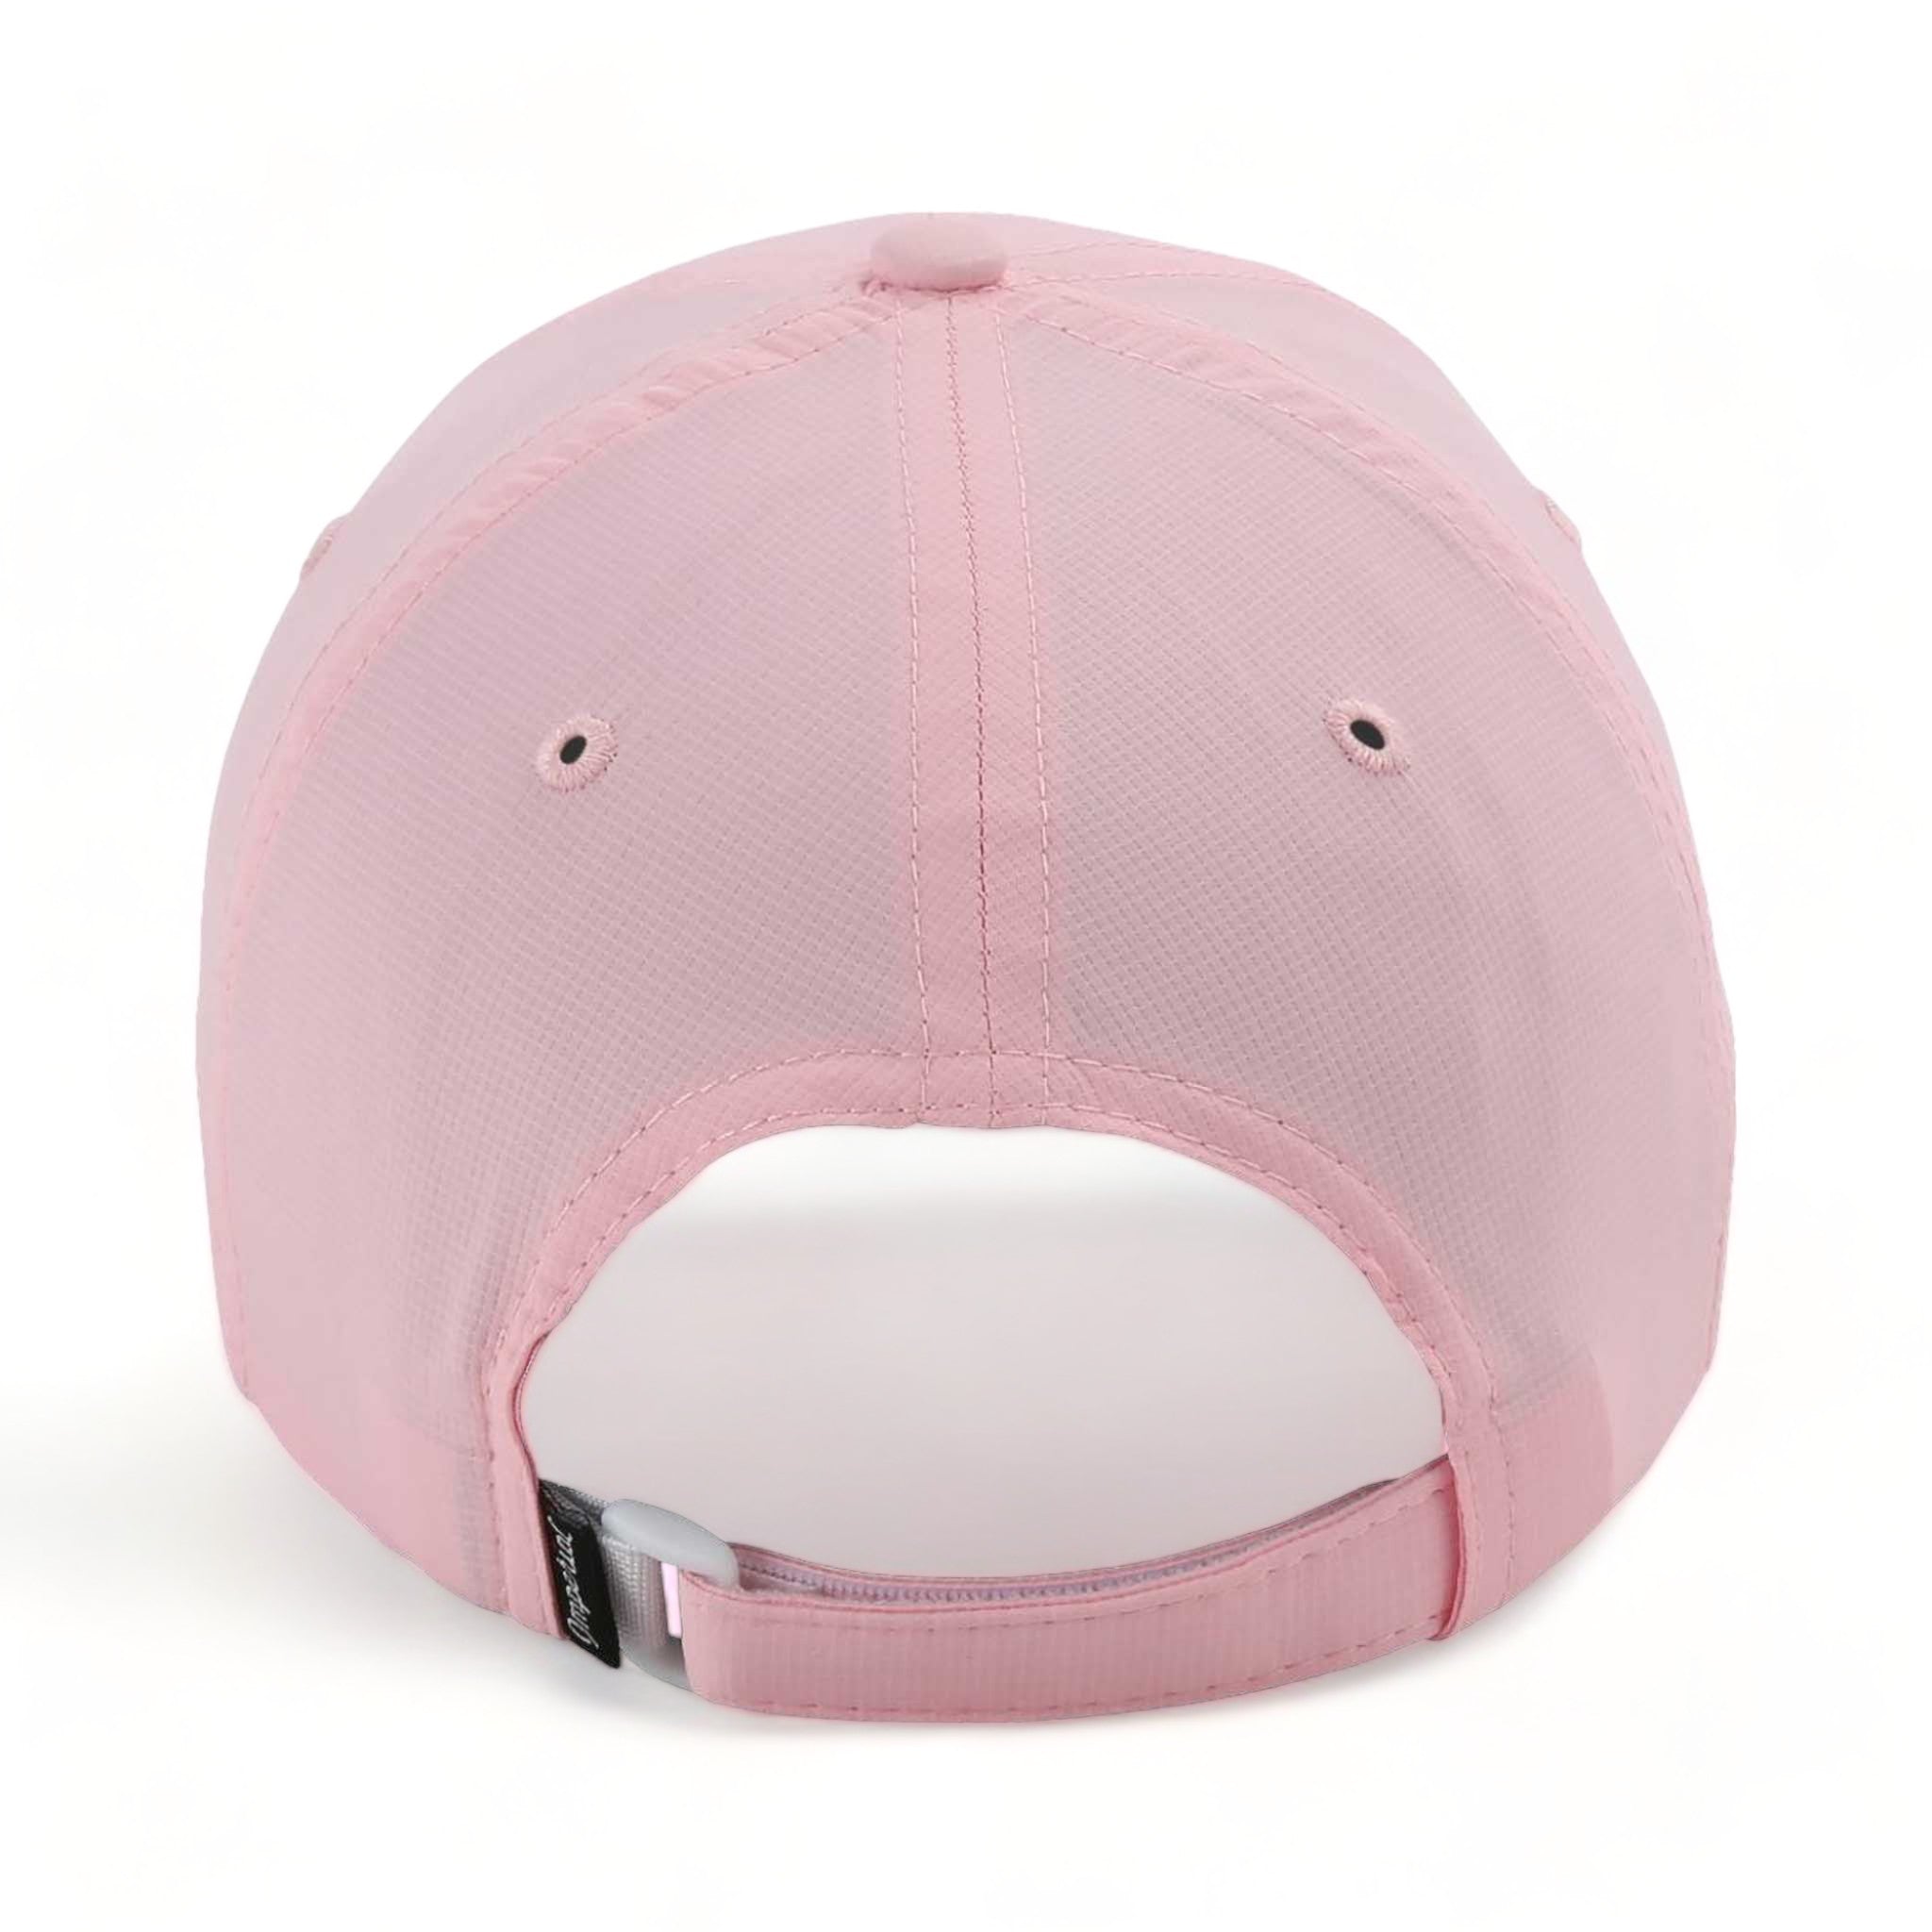 Back view of Imperial X210P custom hat in light pink